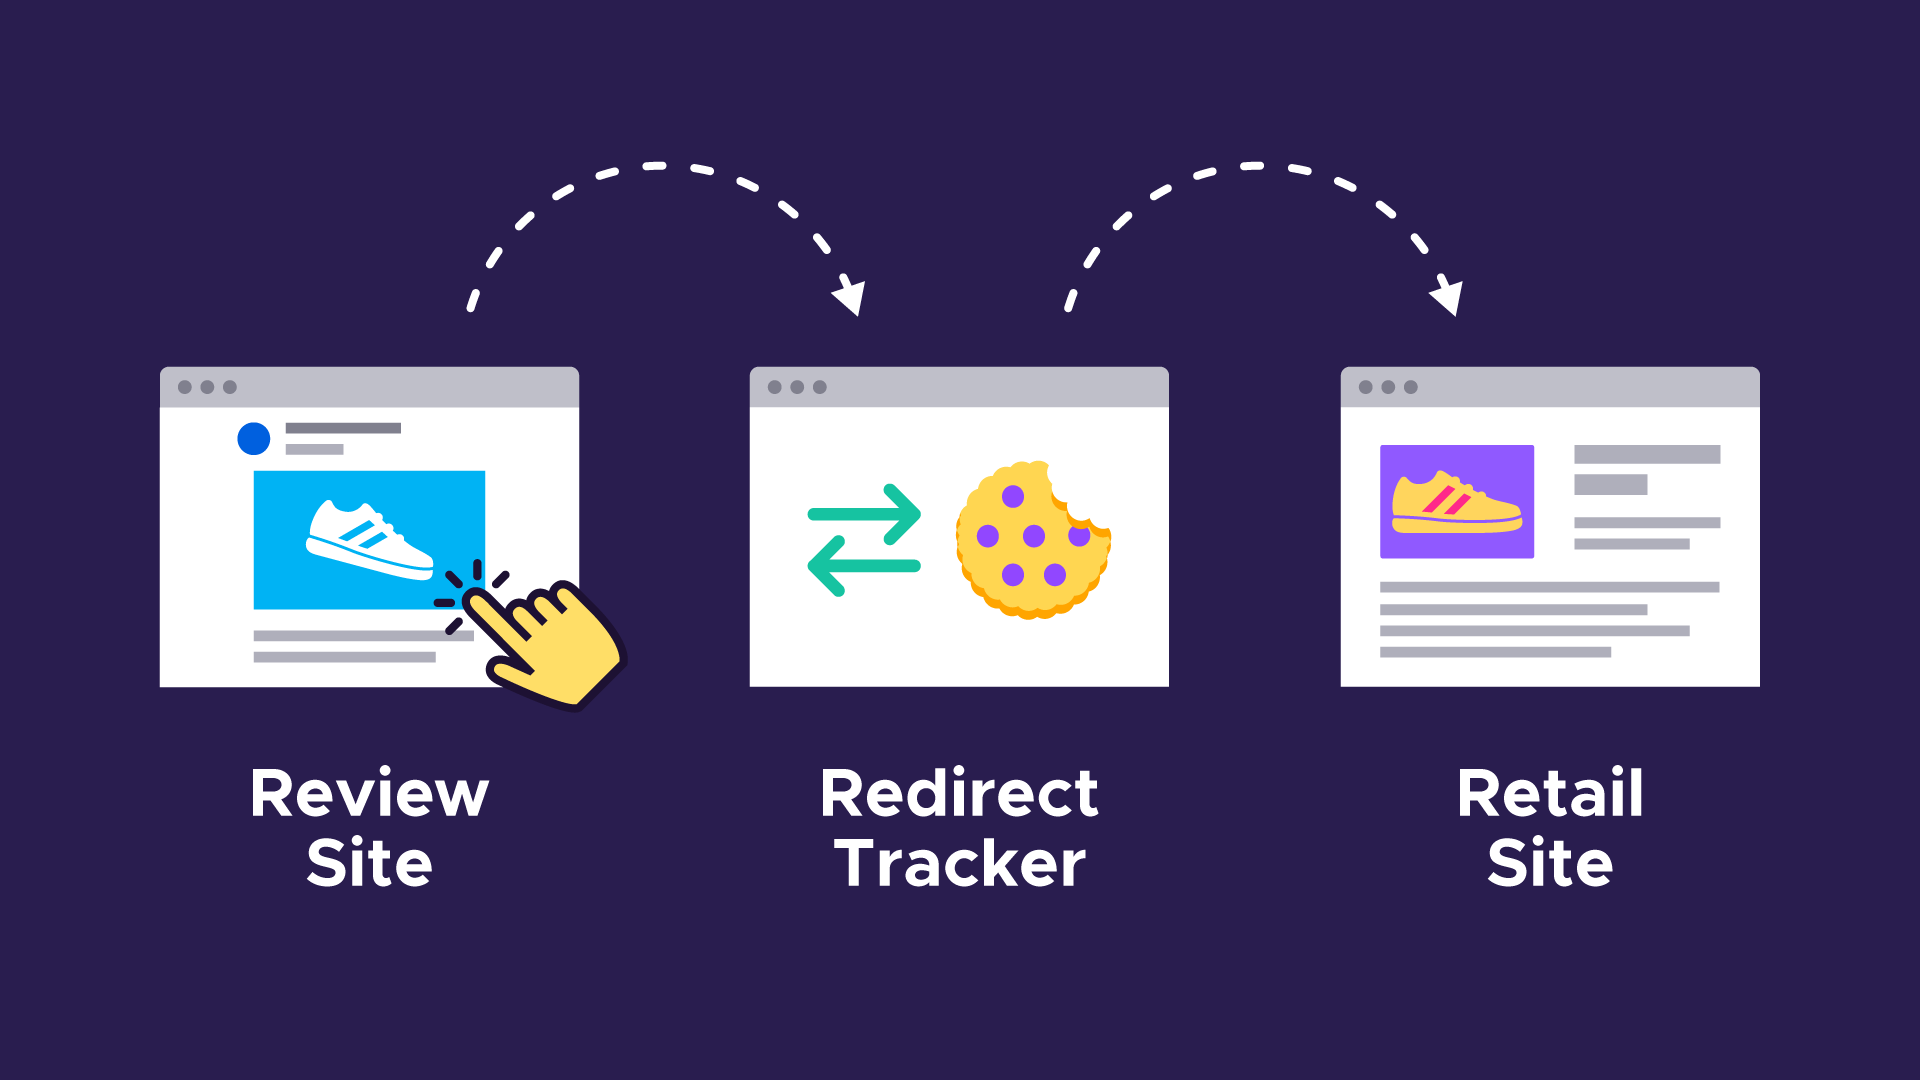 A visual example of redirect tracking: a review site redirects to the redirect tracker, which redirects to a retail site.